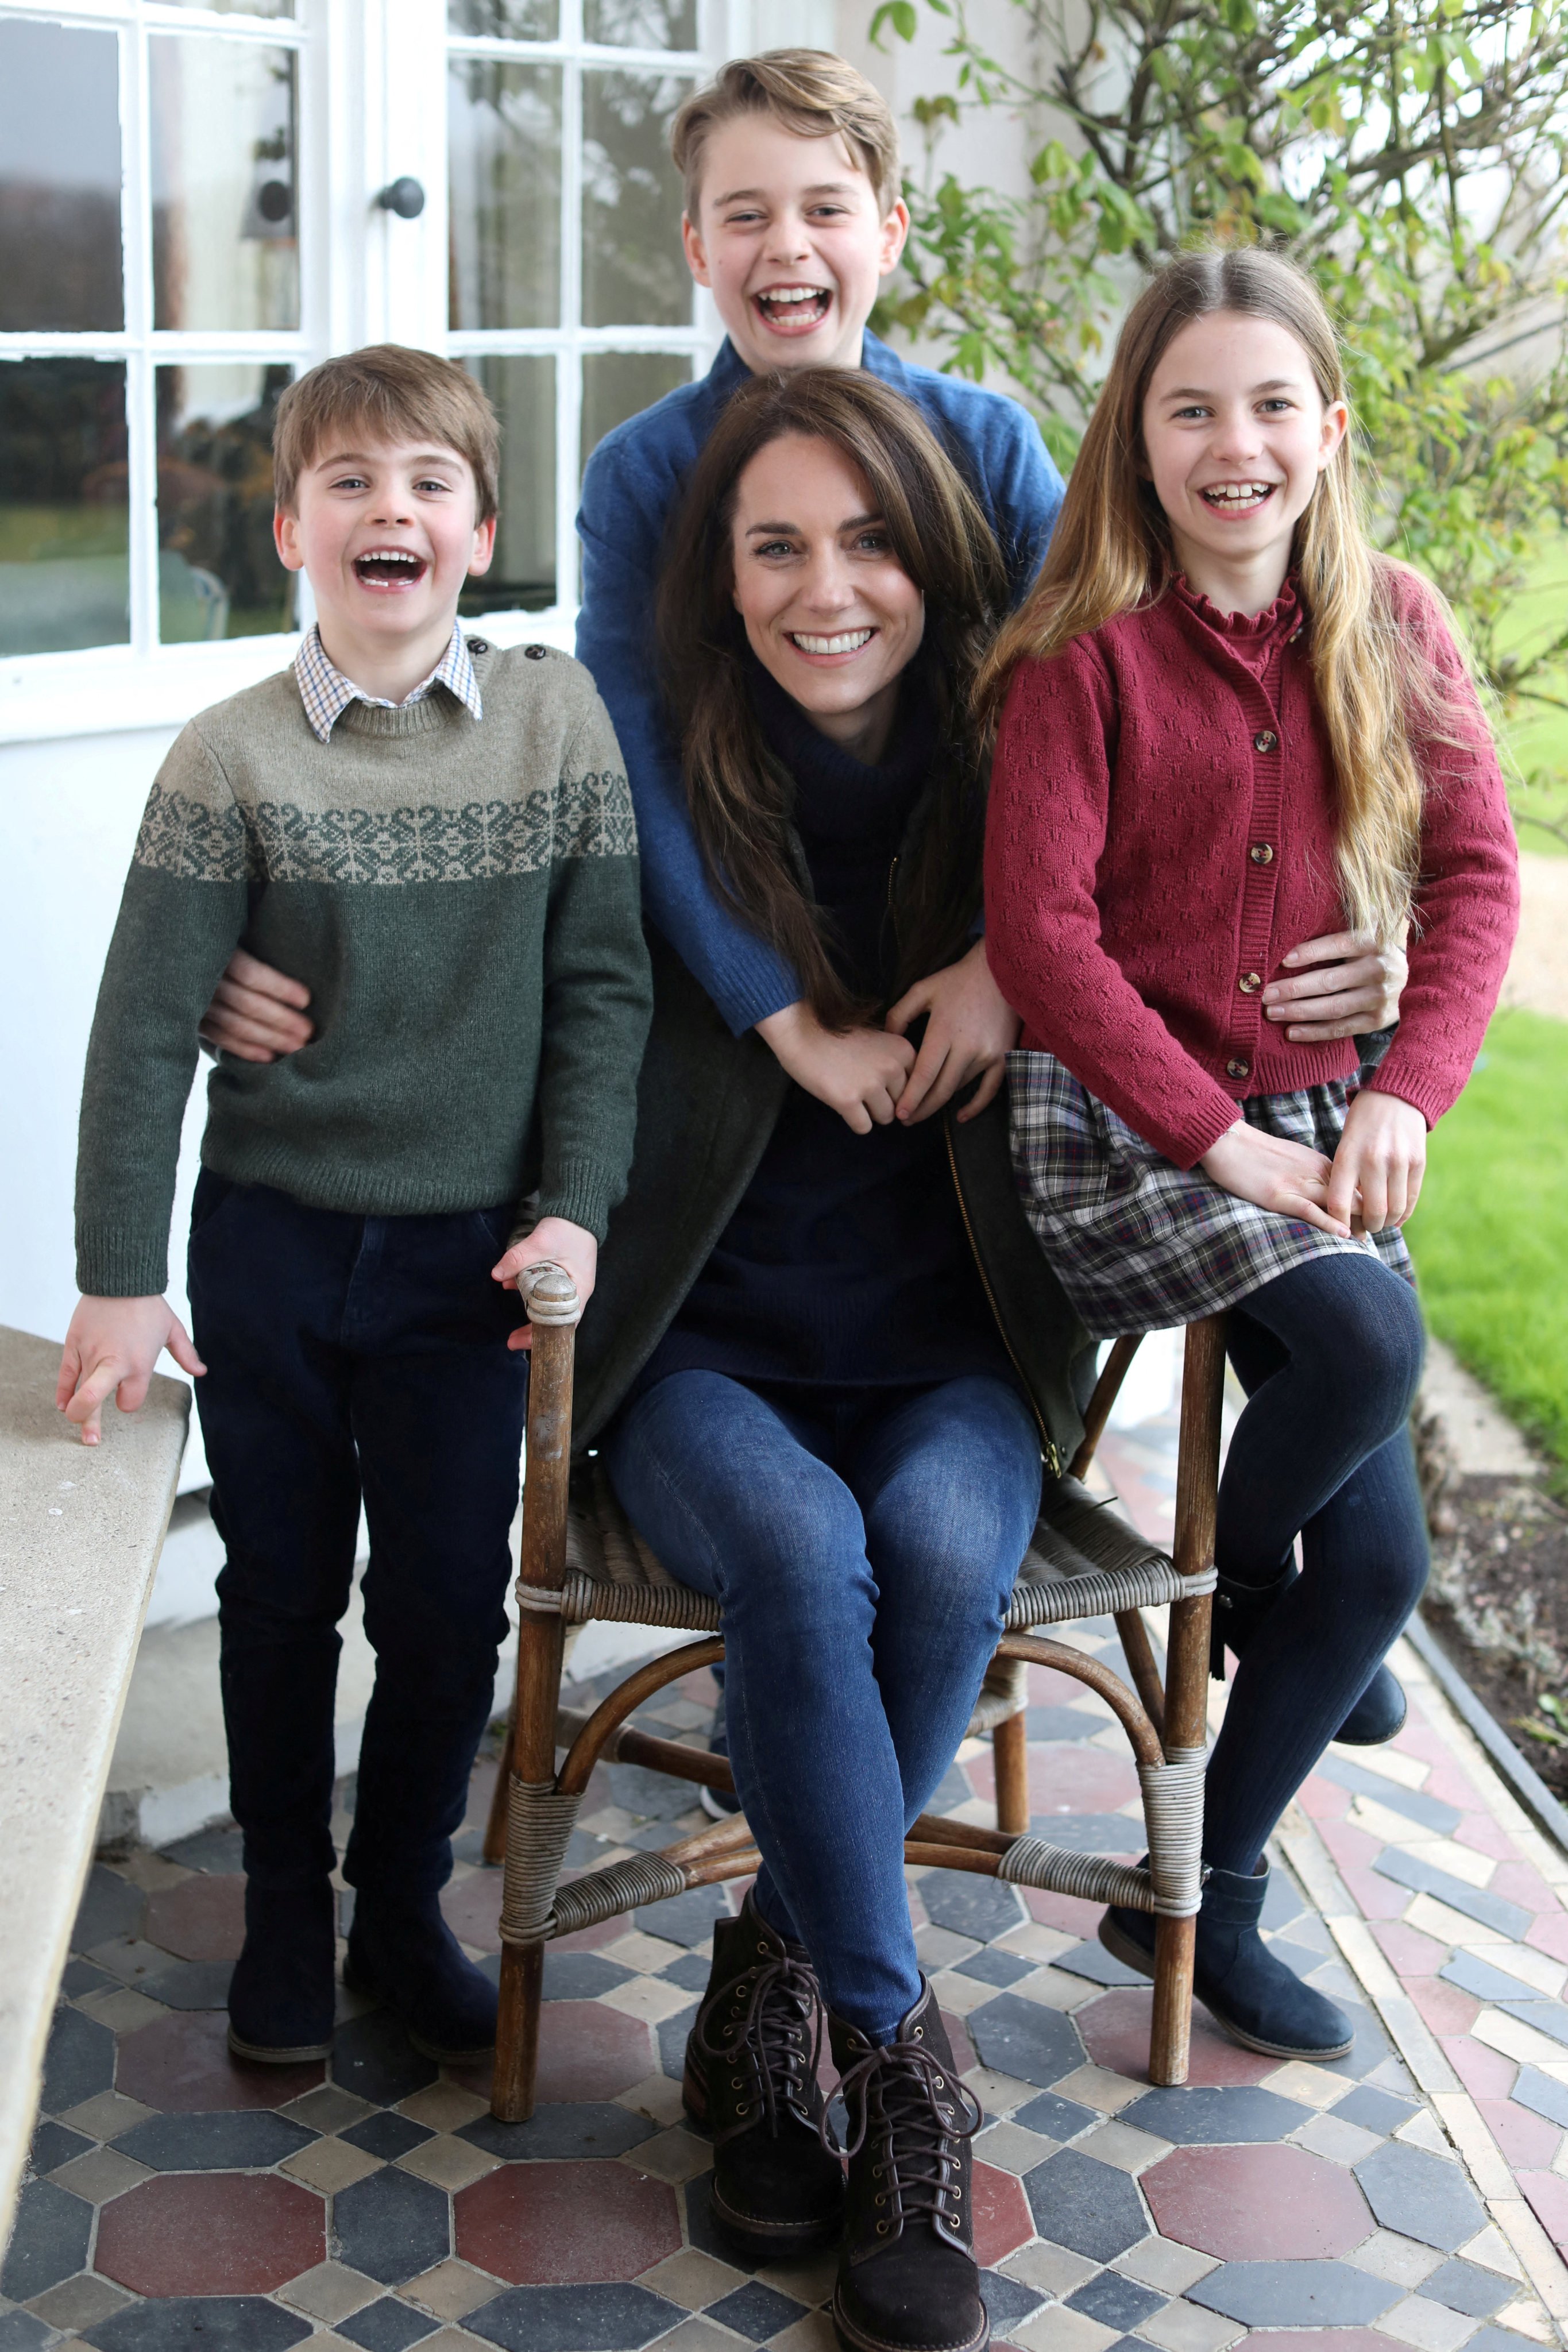 Kensington palace issued this photograph of Kate and her three children on Sunday. Photo: Prince of Wales/Kensington Palace